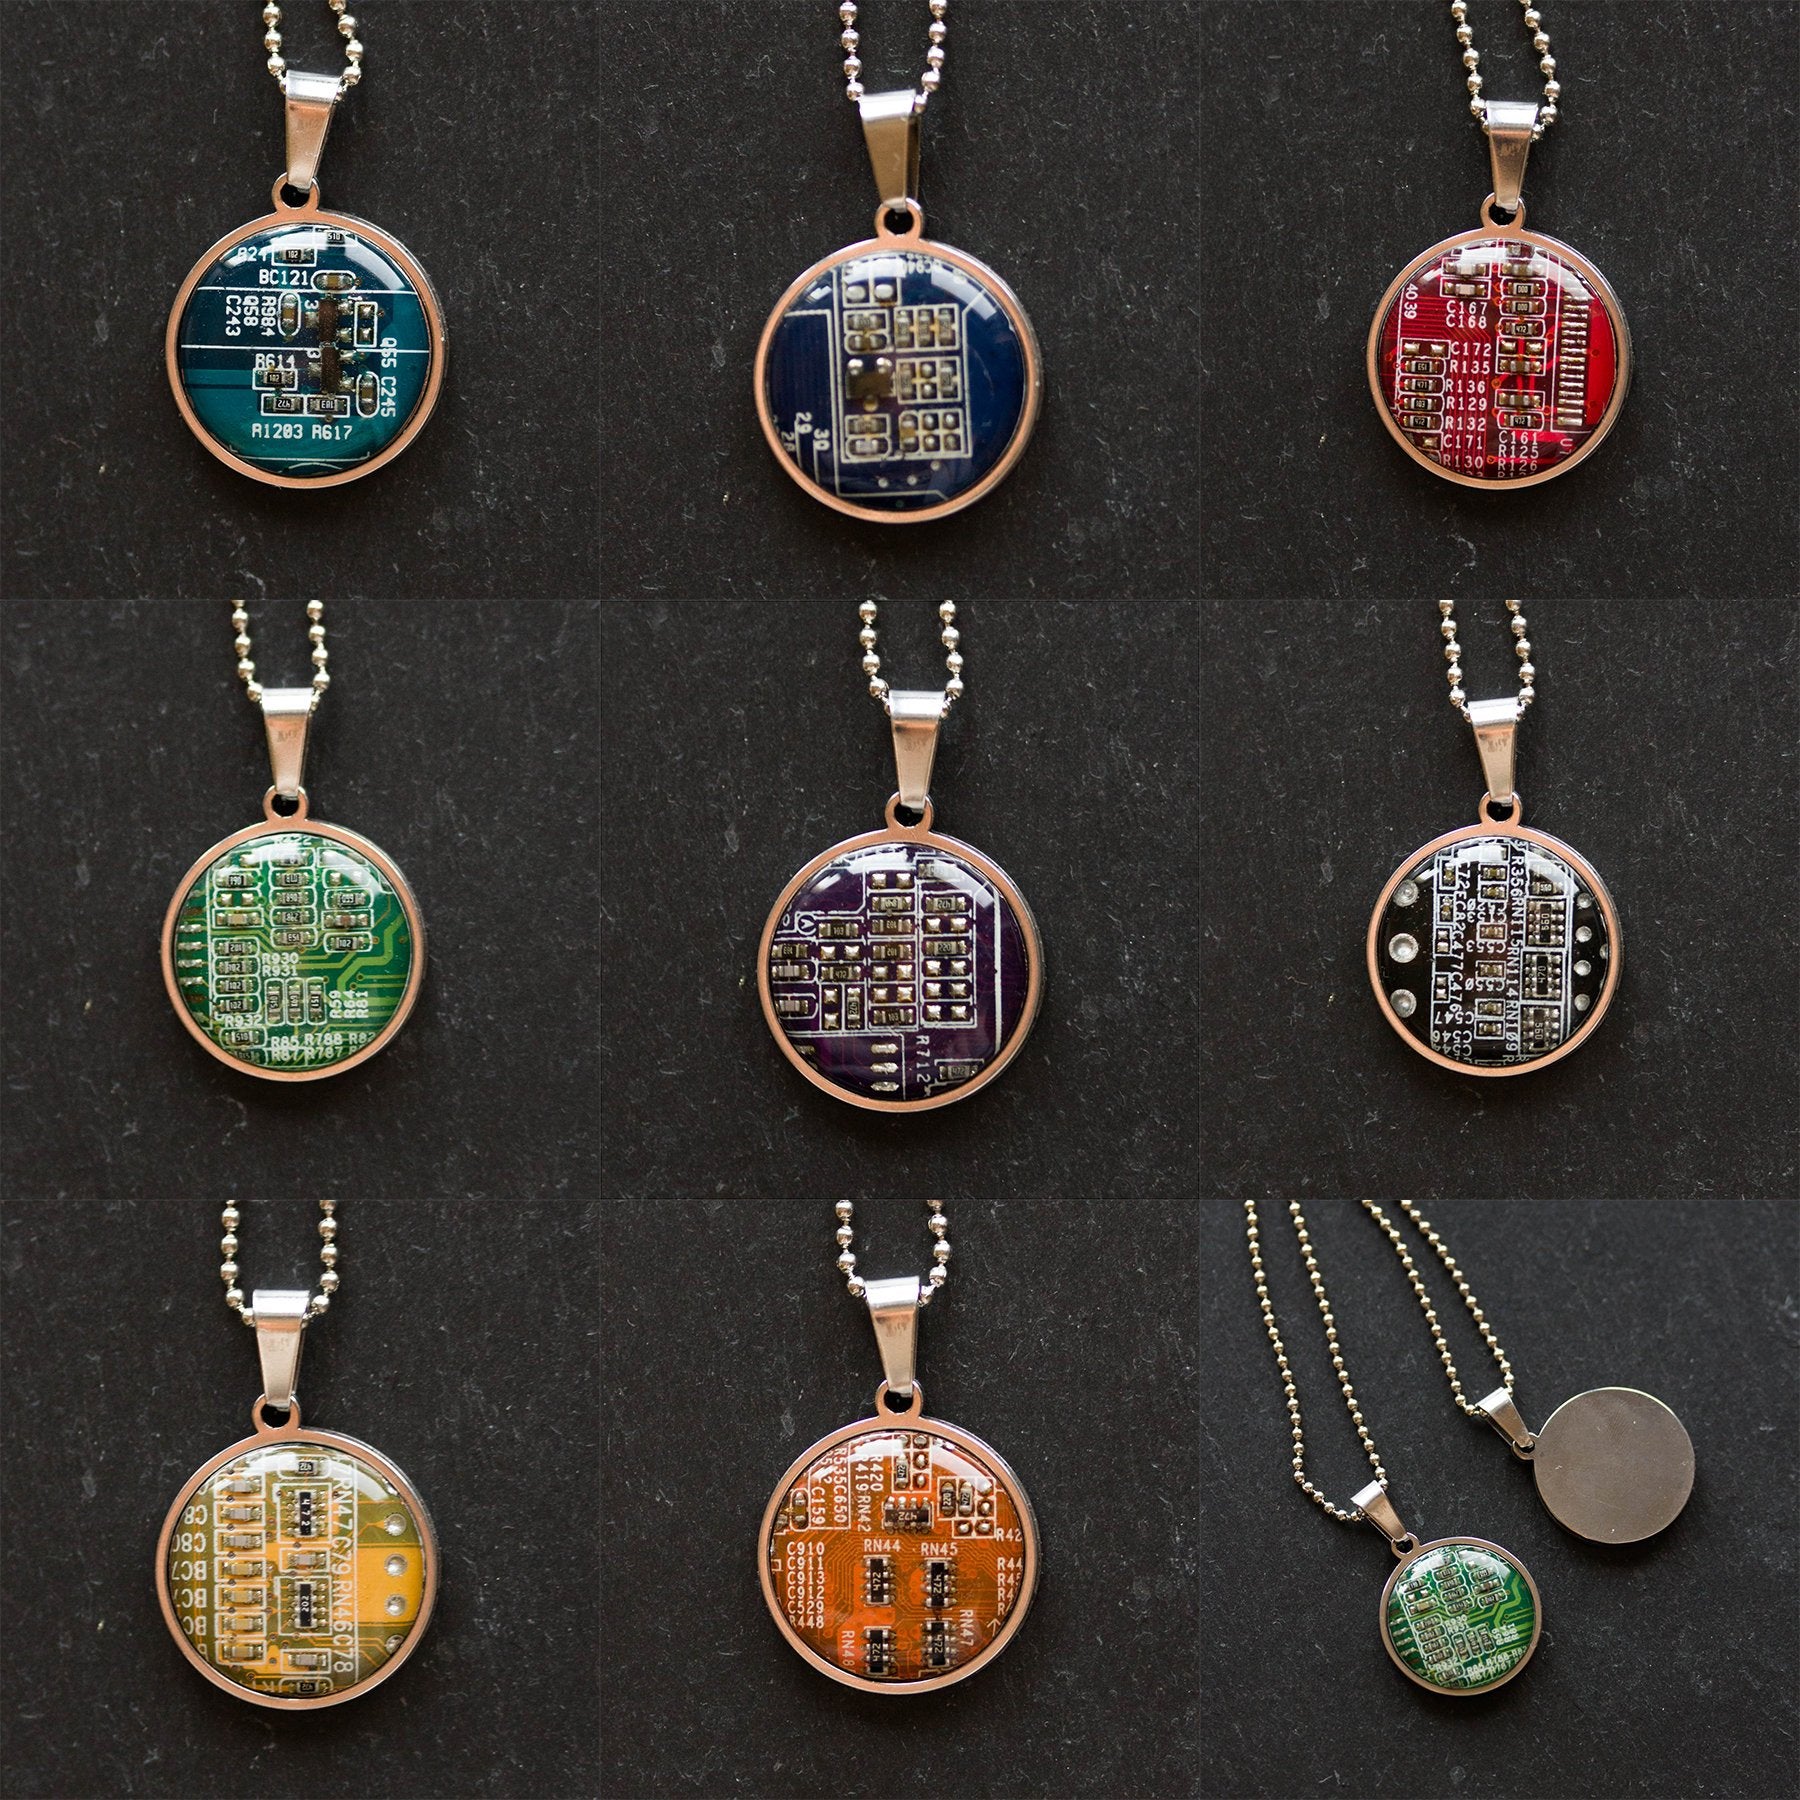 REAL Circuit board necklace, 18mm round, gift for computer nerd, recycled computer motherboard